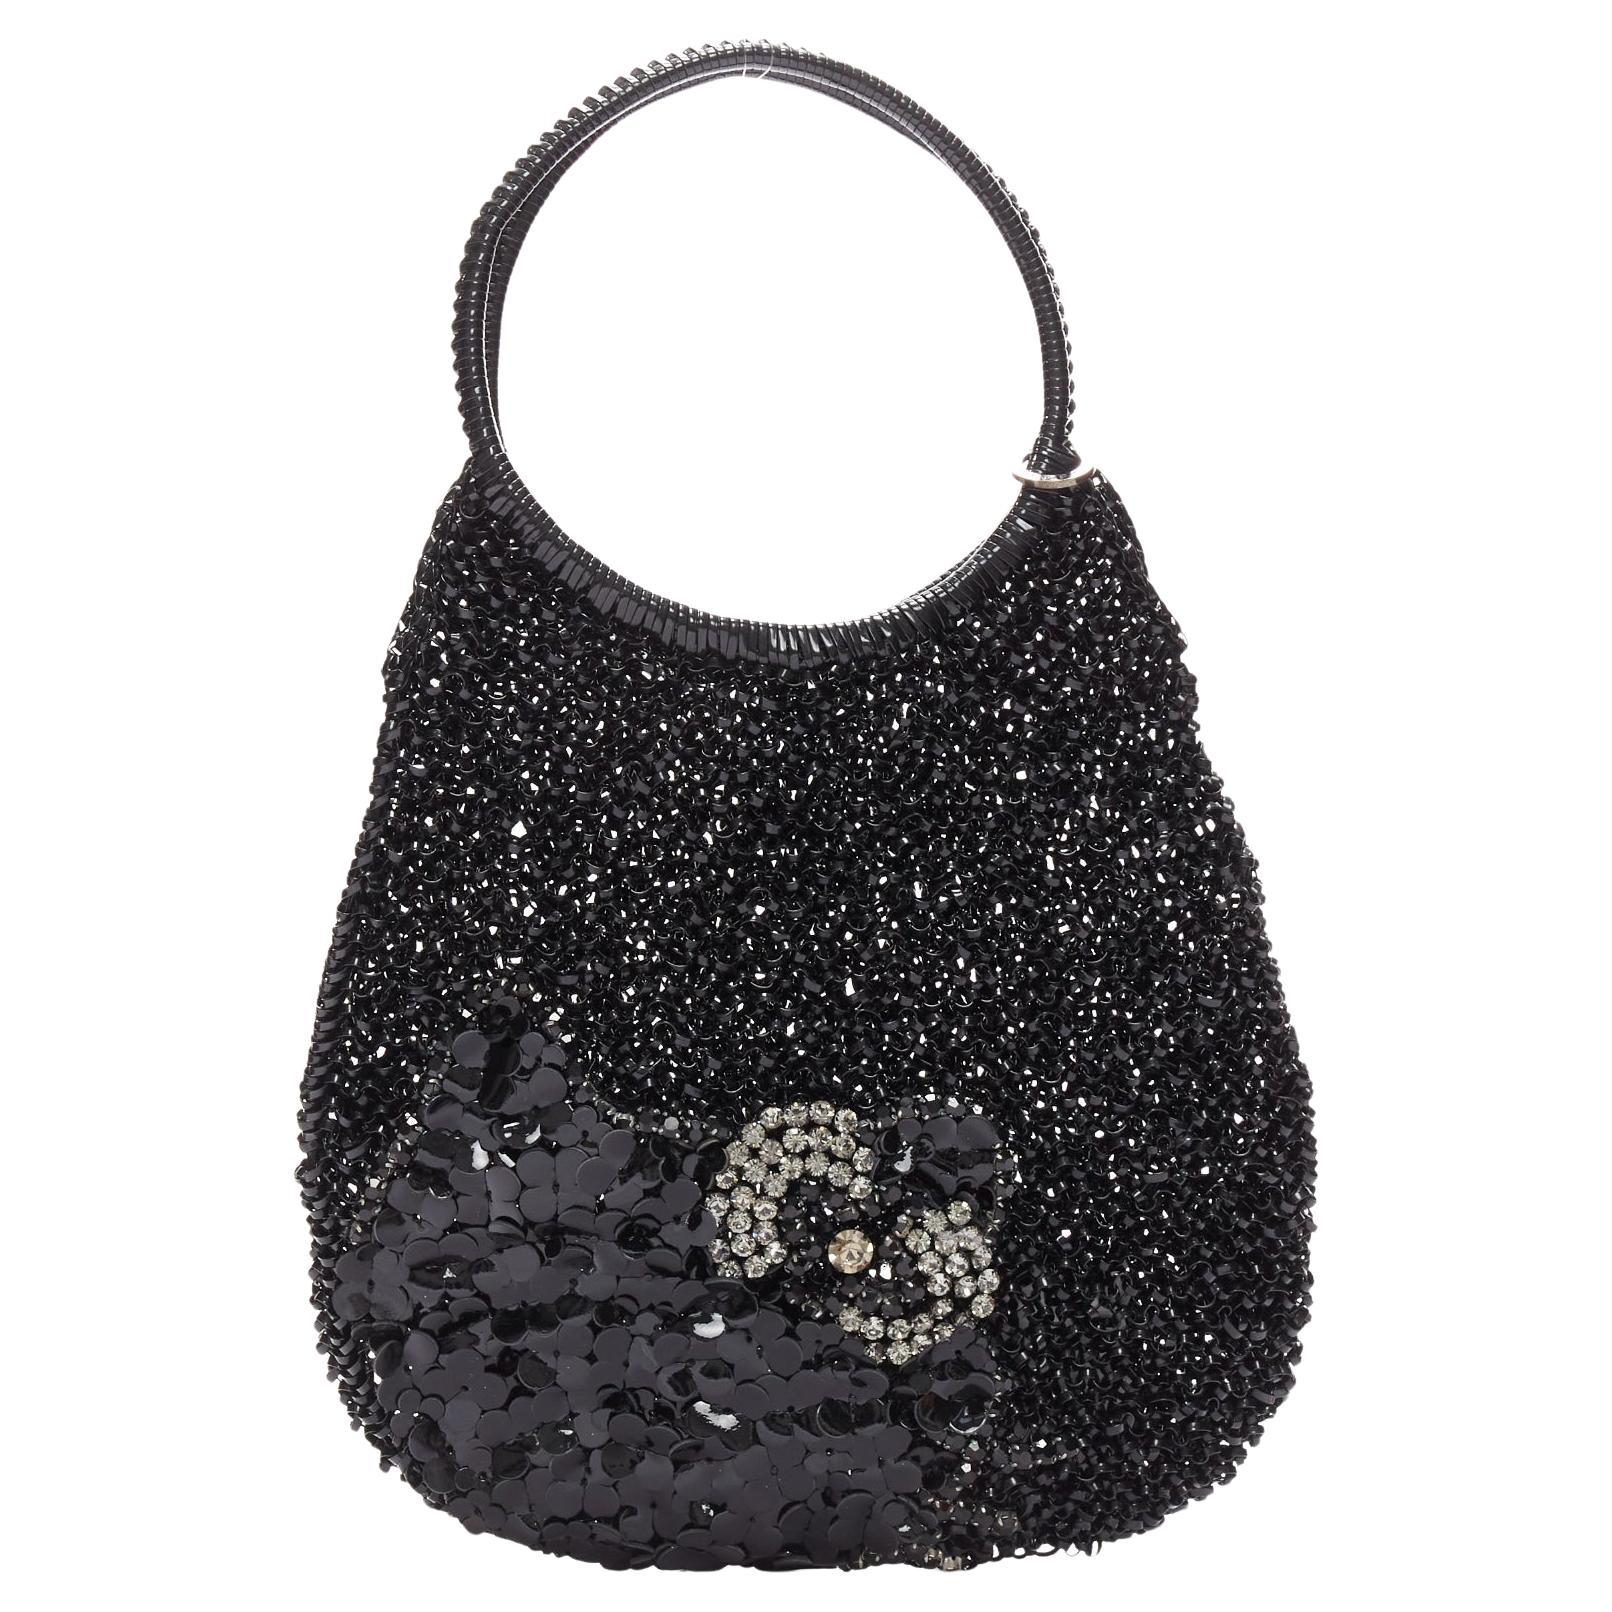 ANTEPRIMA HELLO KITTY Wire Bag black crystal leather sequin teardrop tote For Sale